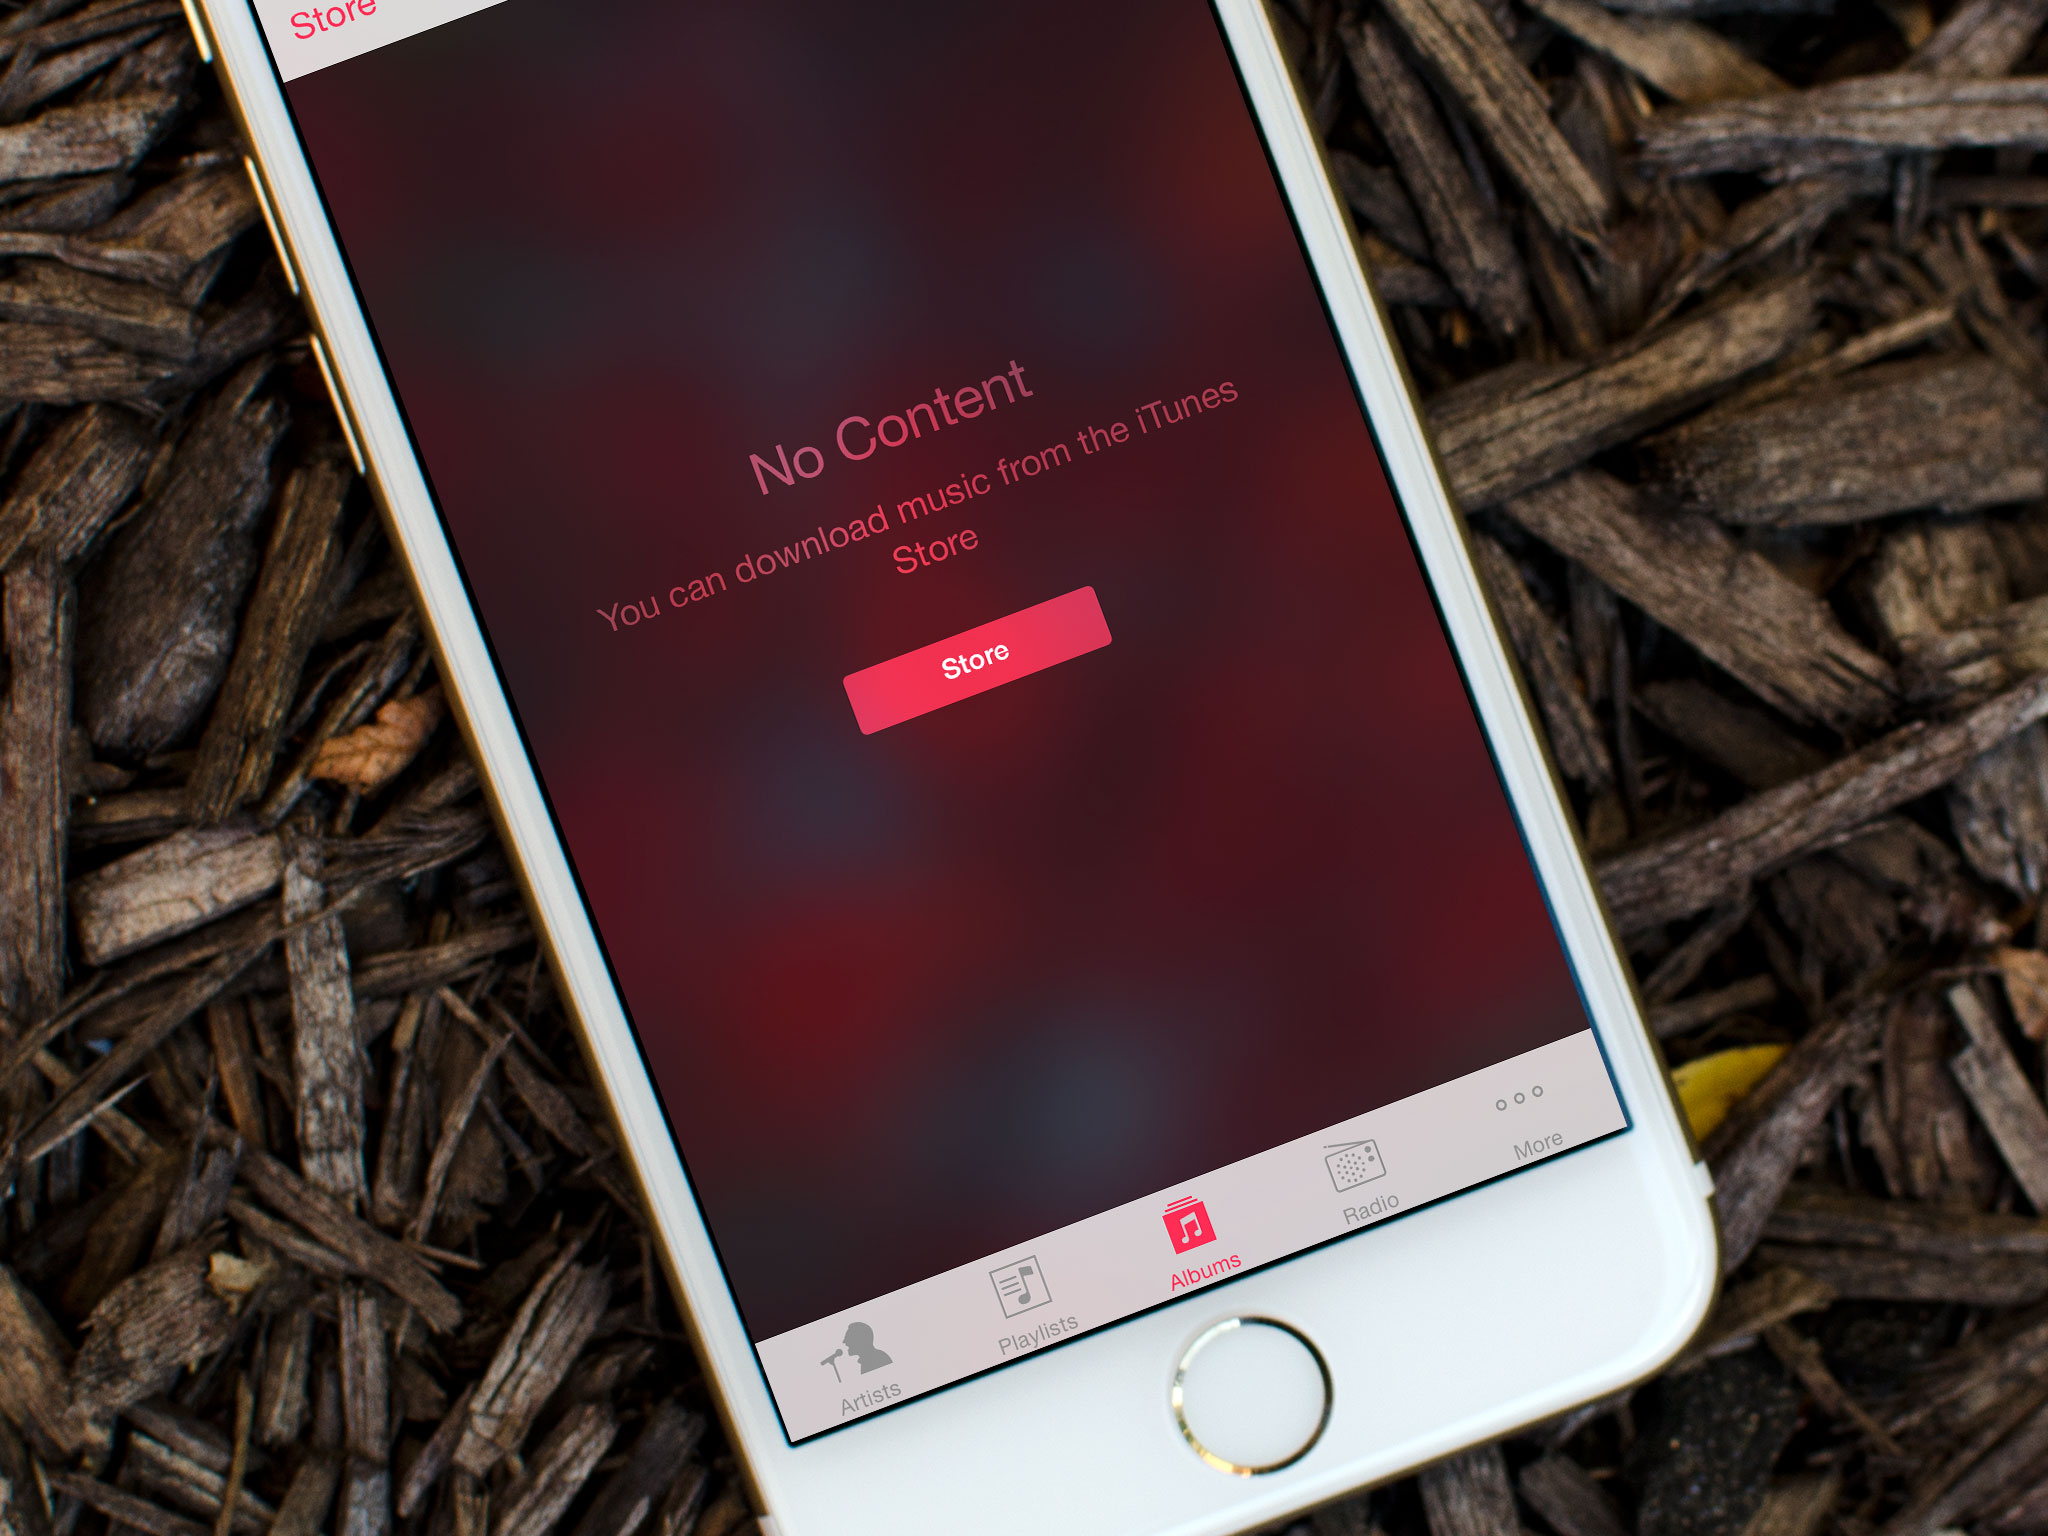 Can&#39;t sync music from iTunes in iOS 8? Try this fix!